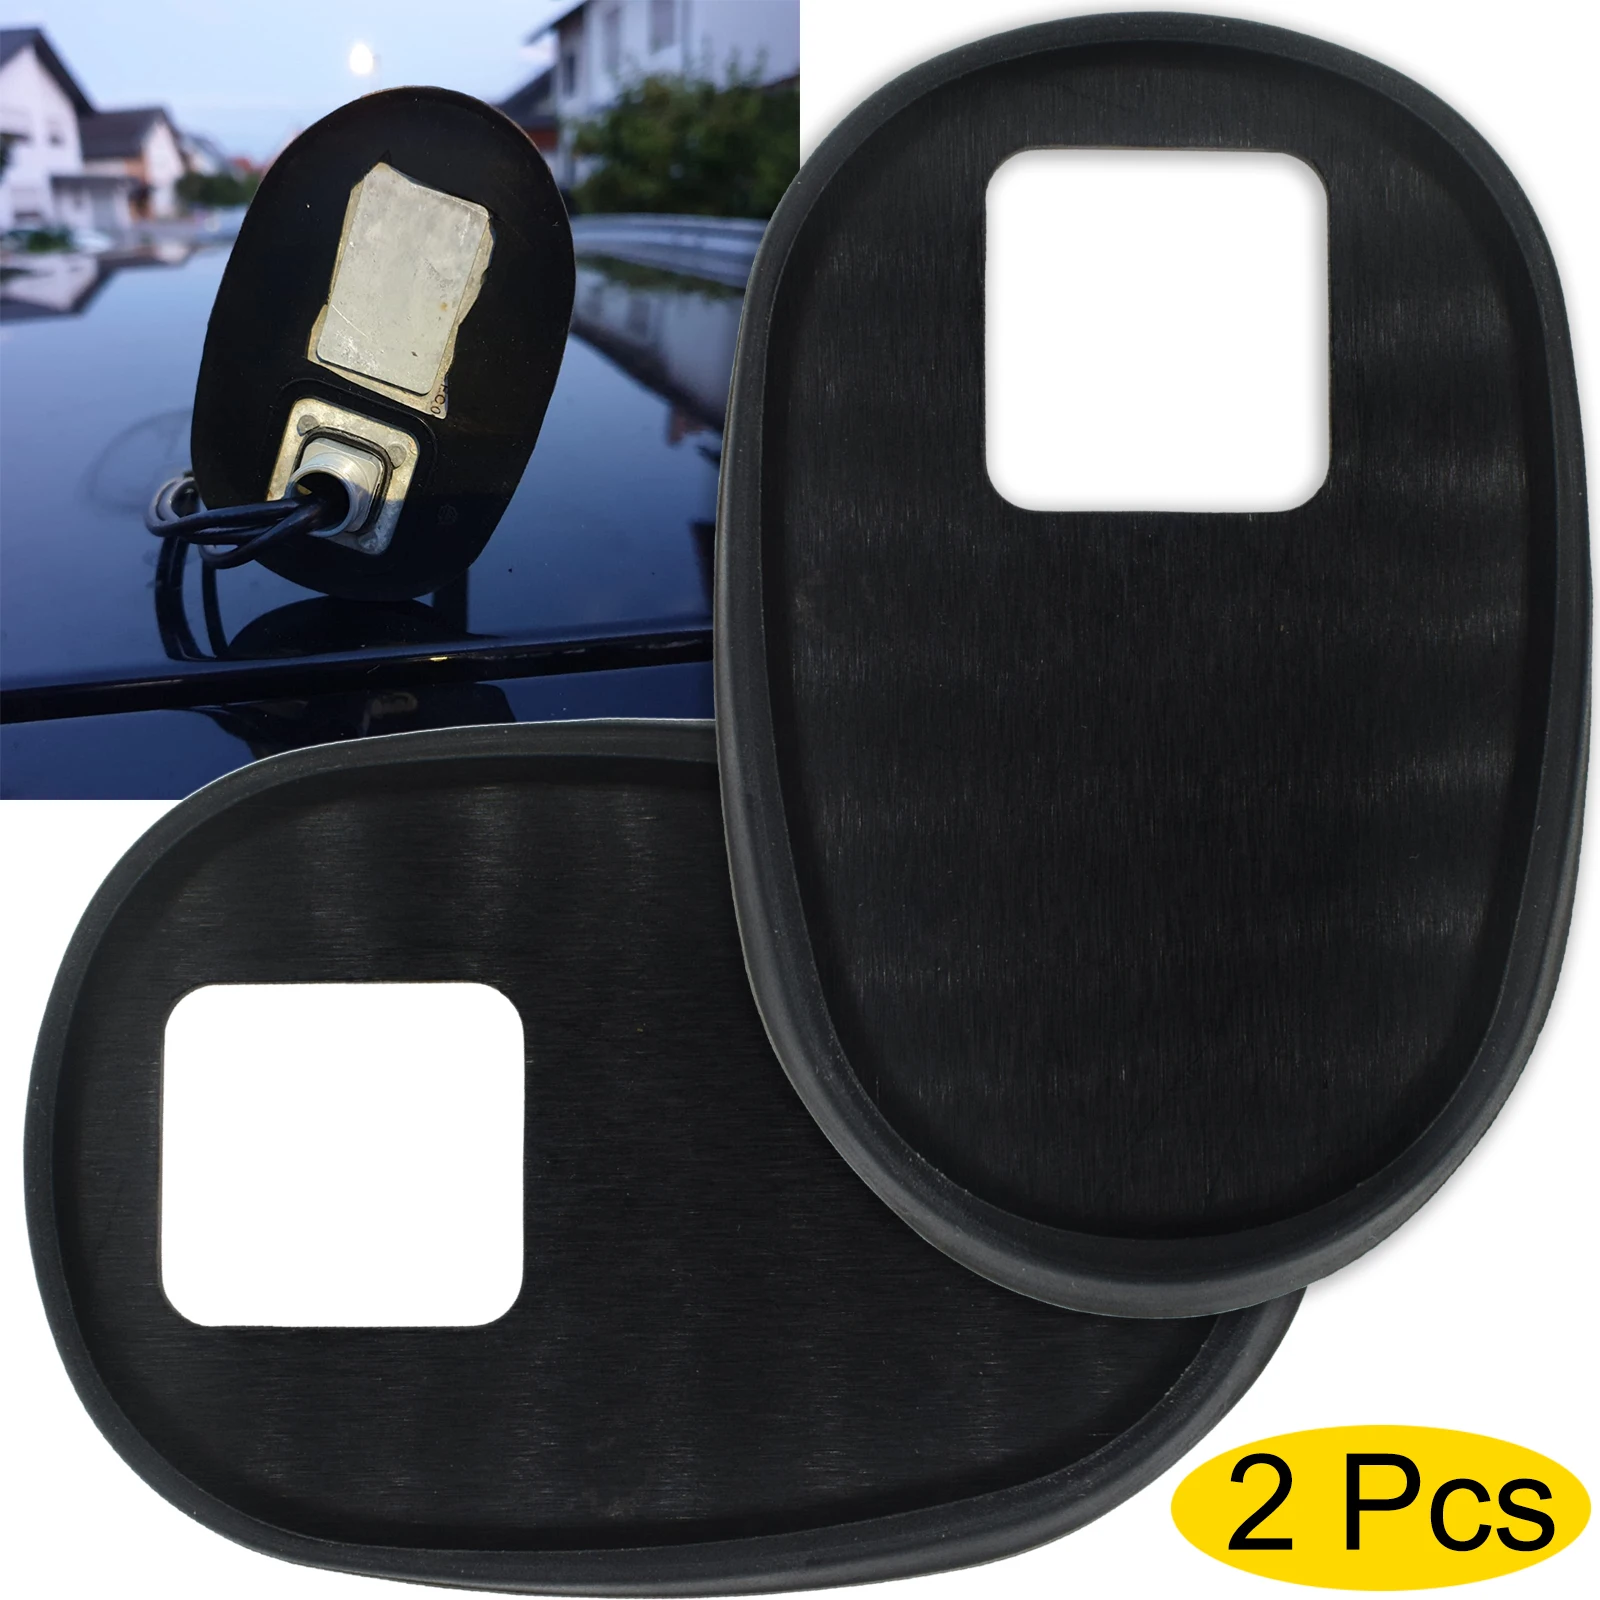 

For Opel / Vauxhall Astra G H Corsa C D Meriva Vectra Signum Zafira A B Car Roof Aerial Antenna Base Gasket Seal Rubber Pad GPS